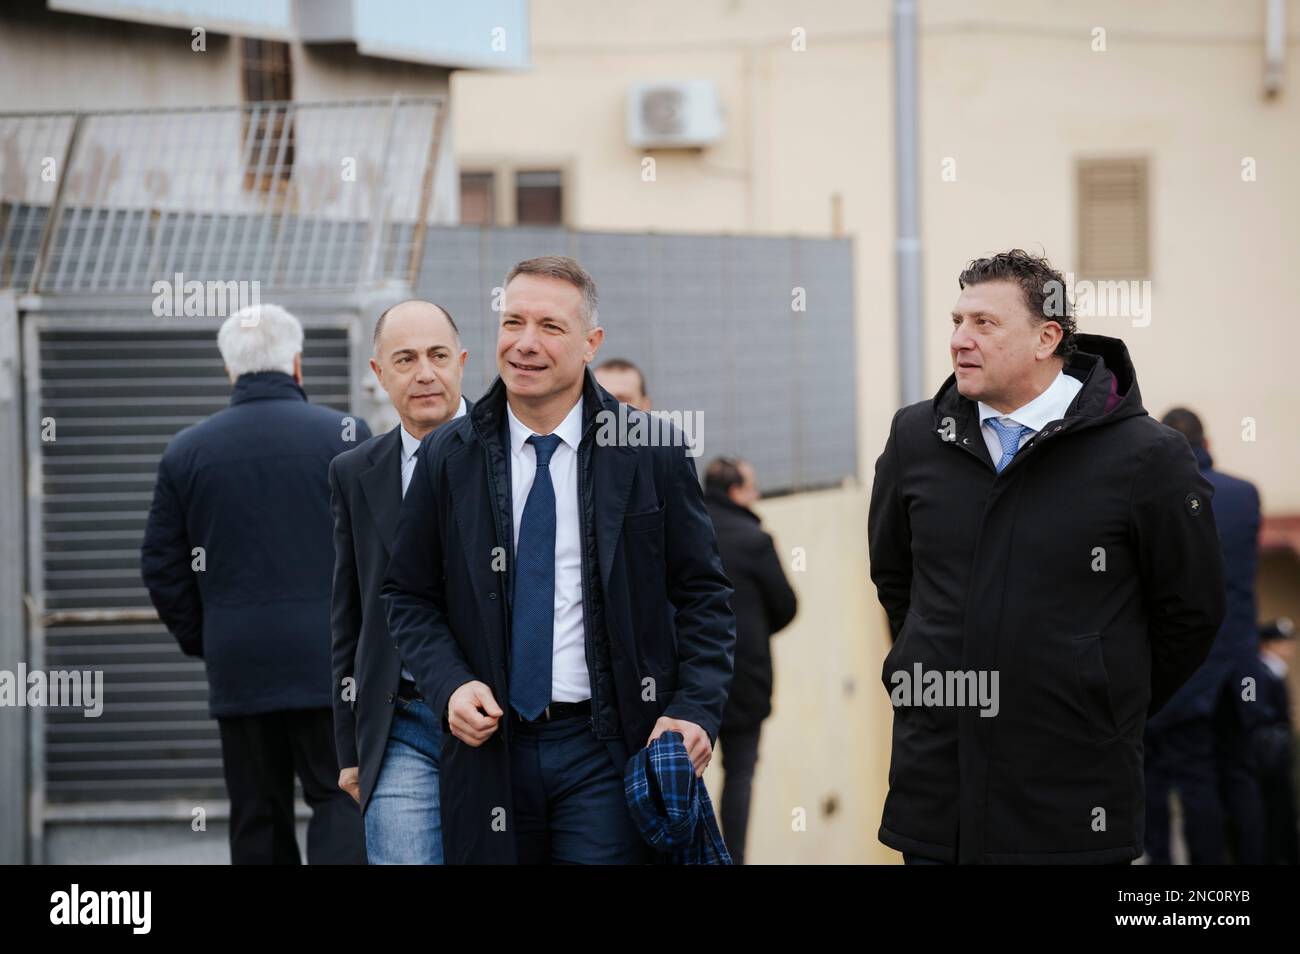 Catanzaro, Italy. 13th Feb, 2023. Camillo Falvo (C), Vibo Valentia' s anti-mafia Prosecutor, seen arriving at the event. The Italian Minister of Interior Matteo Piantedosi attended the inauguration of the operative Anti-mafia Investigation Department (DIA - Direzione Investigativa Antimafia) The Minister also attended the provincial meeting for order and public security and the signature for a protocol for re-usage of buildings and assets seized from organise crime. (Photo by Valeria Ferraro /SOPA Images/Sipa USA) Credit: Sipa USA/Alamy Live News Stock Photo